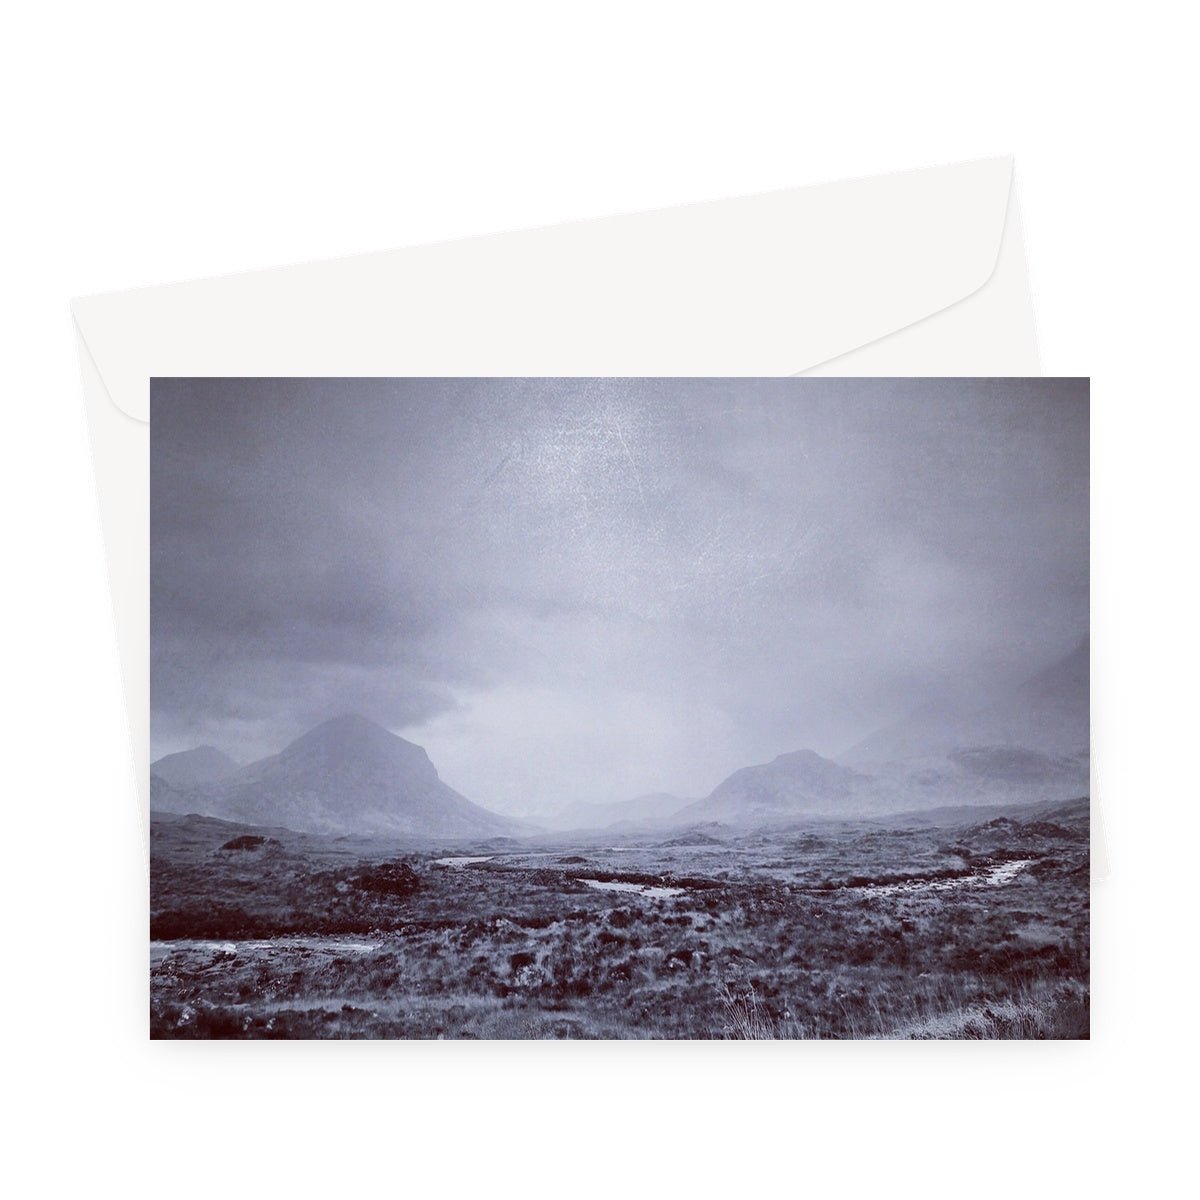 The Brooding Cuillin Skye Art Gifts Greeting Card-Greetings Cards-Skye Art Gallery-A5 Landscape-10 Cards-Paintings, Prints, Homeware, Art Gifts From Scotland By Scottish Artist Kevin Hunter